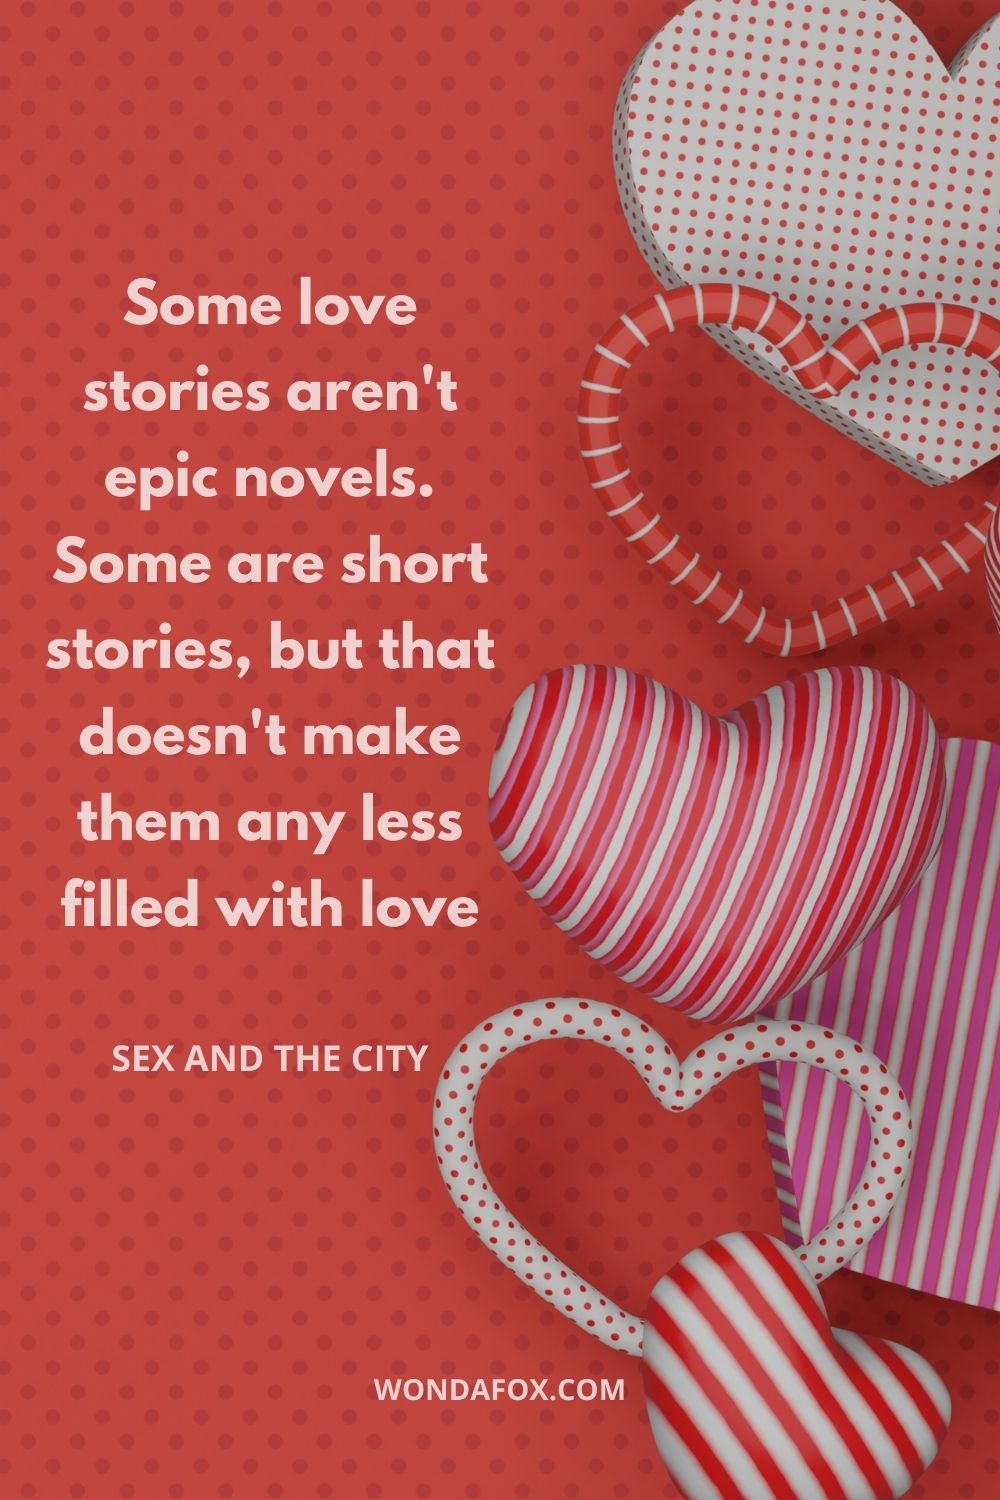 Some love stories aren't epic novels. Some are short stories, but that doesn't make them any less filled with love.